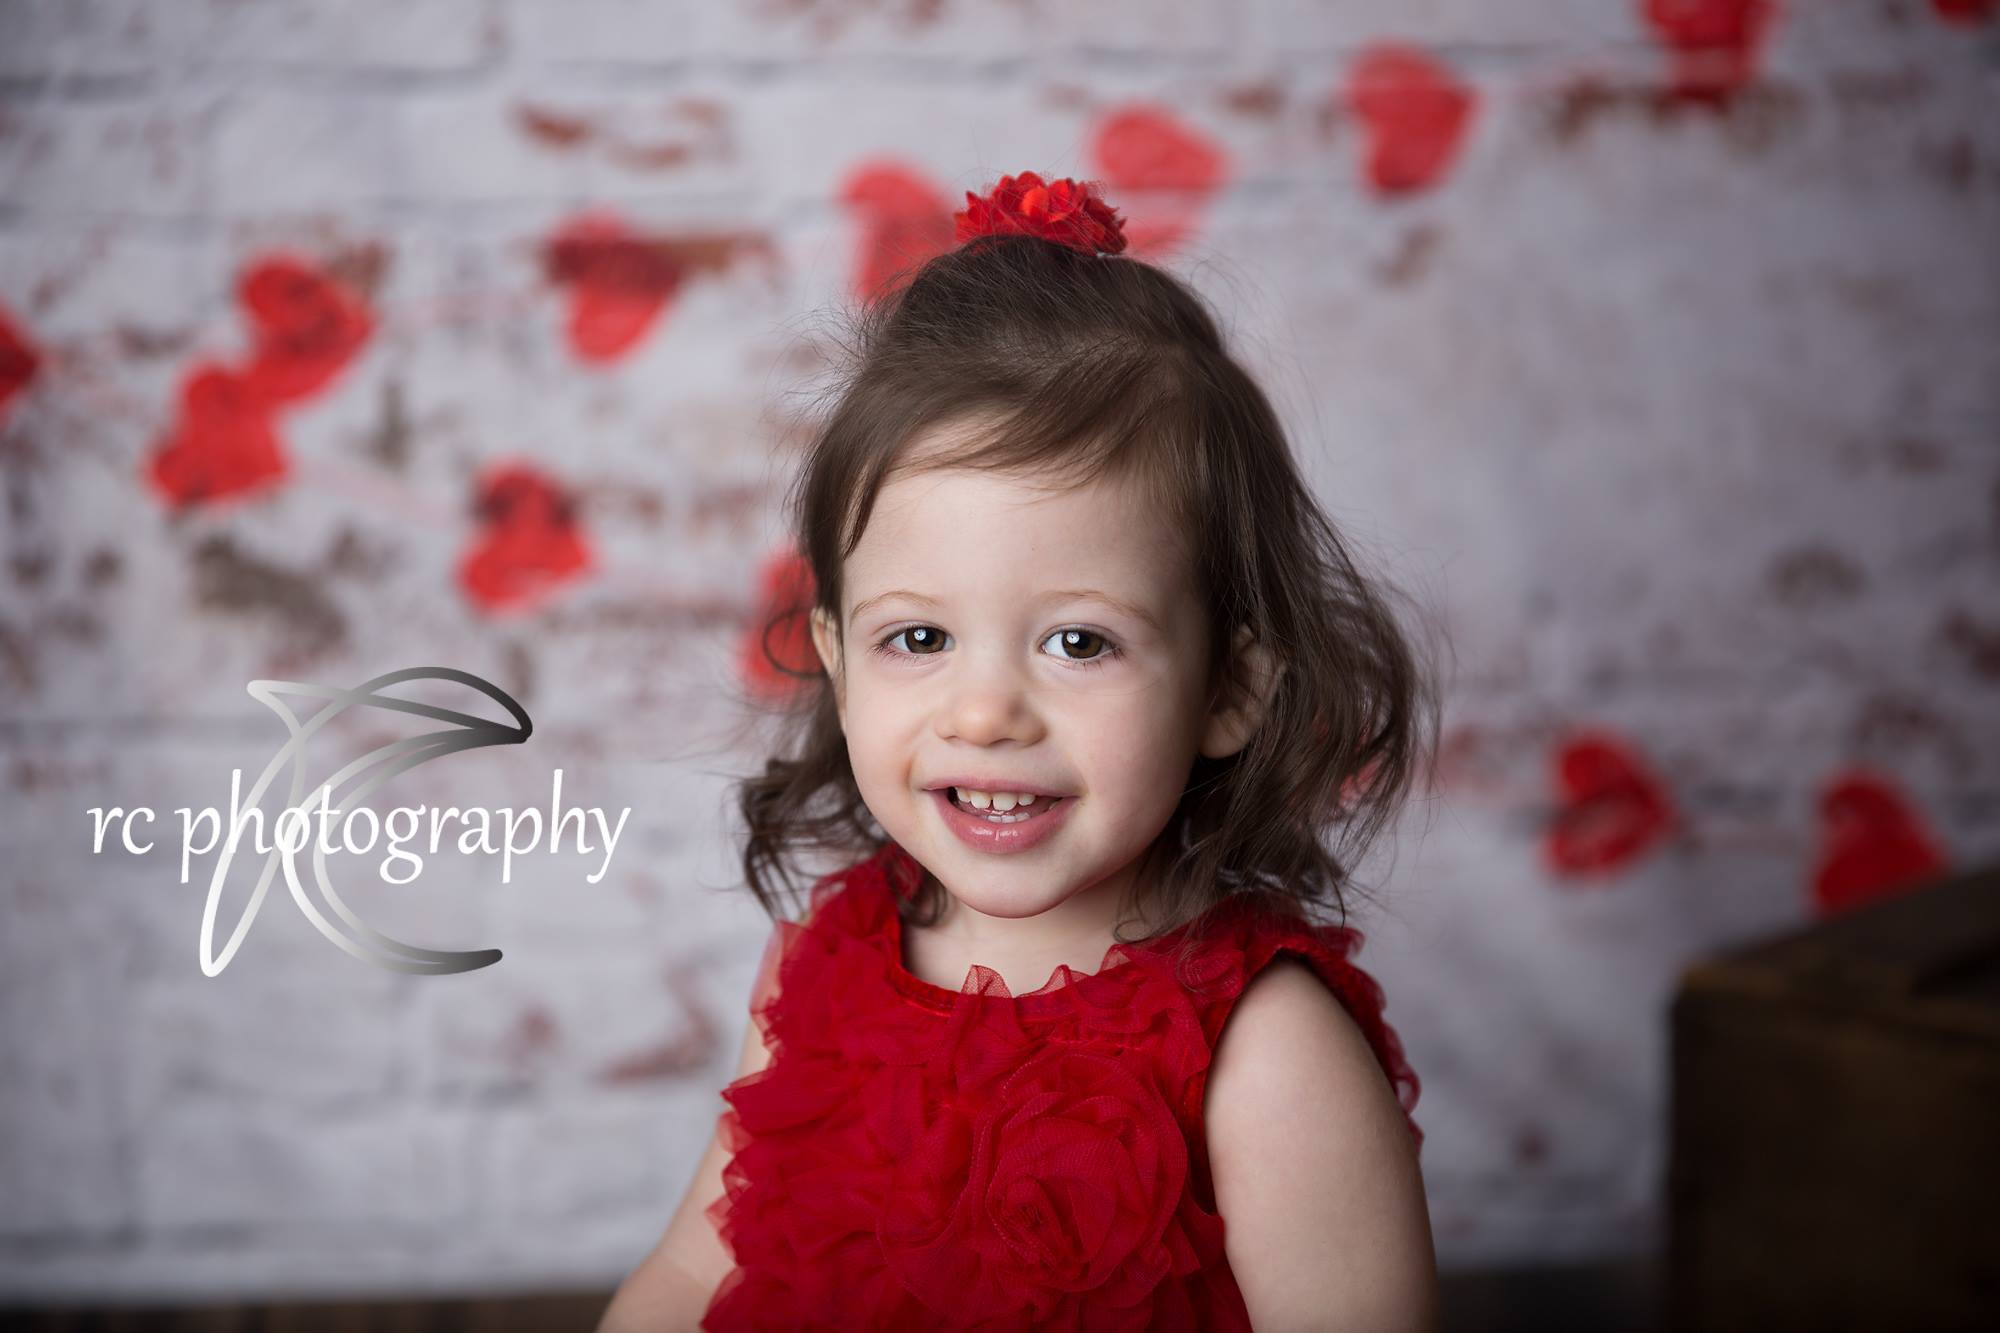 Kate white brick wall with red hearts Valentine's Day Backdrop for Photography designed by Jerry_Sina